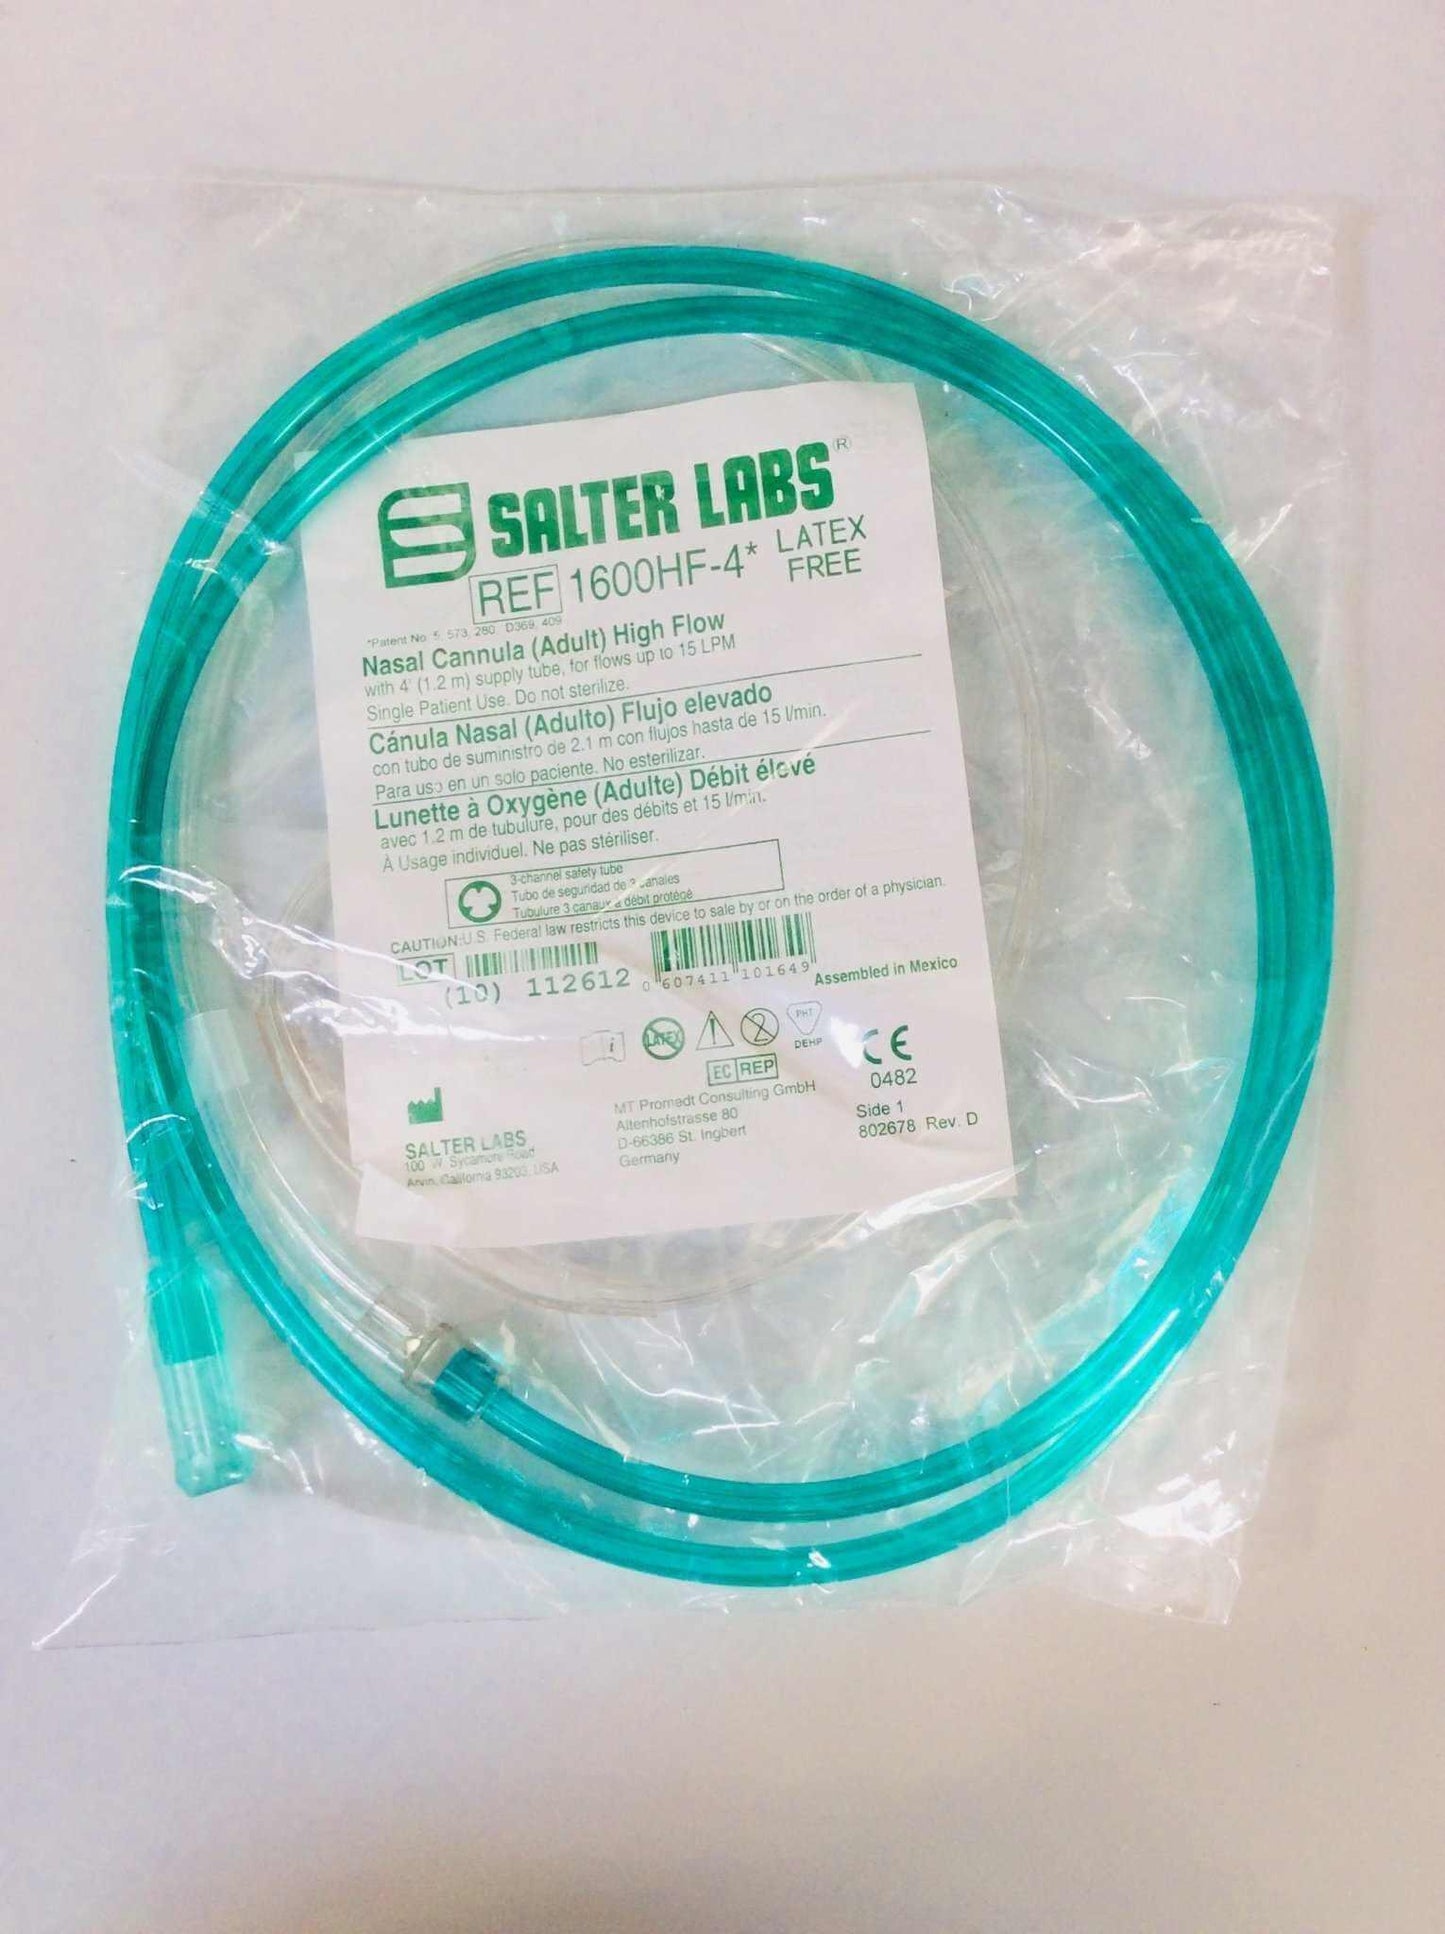 NEW Salter Labs Adult High Flow Nasal Cannula 1600HF-4 - MBR Medicals